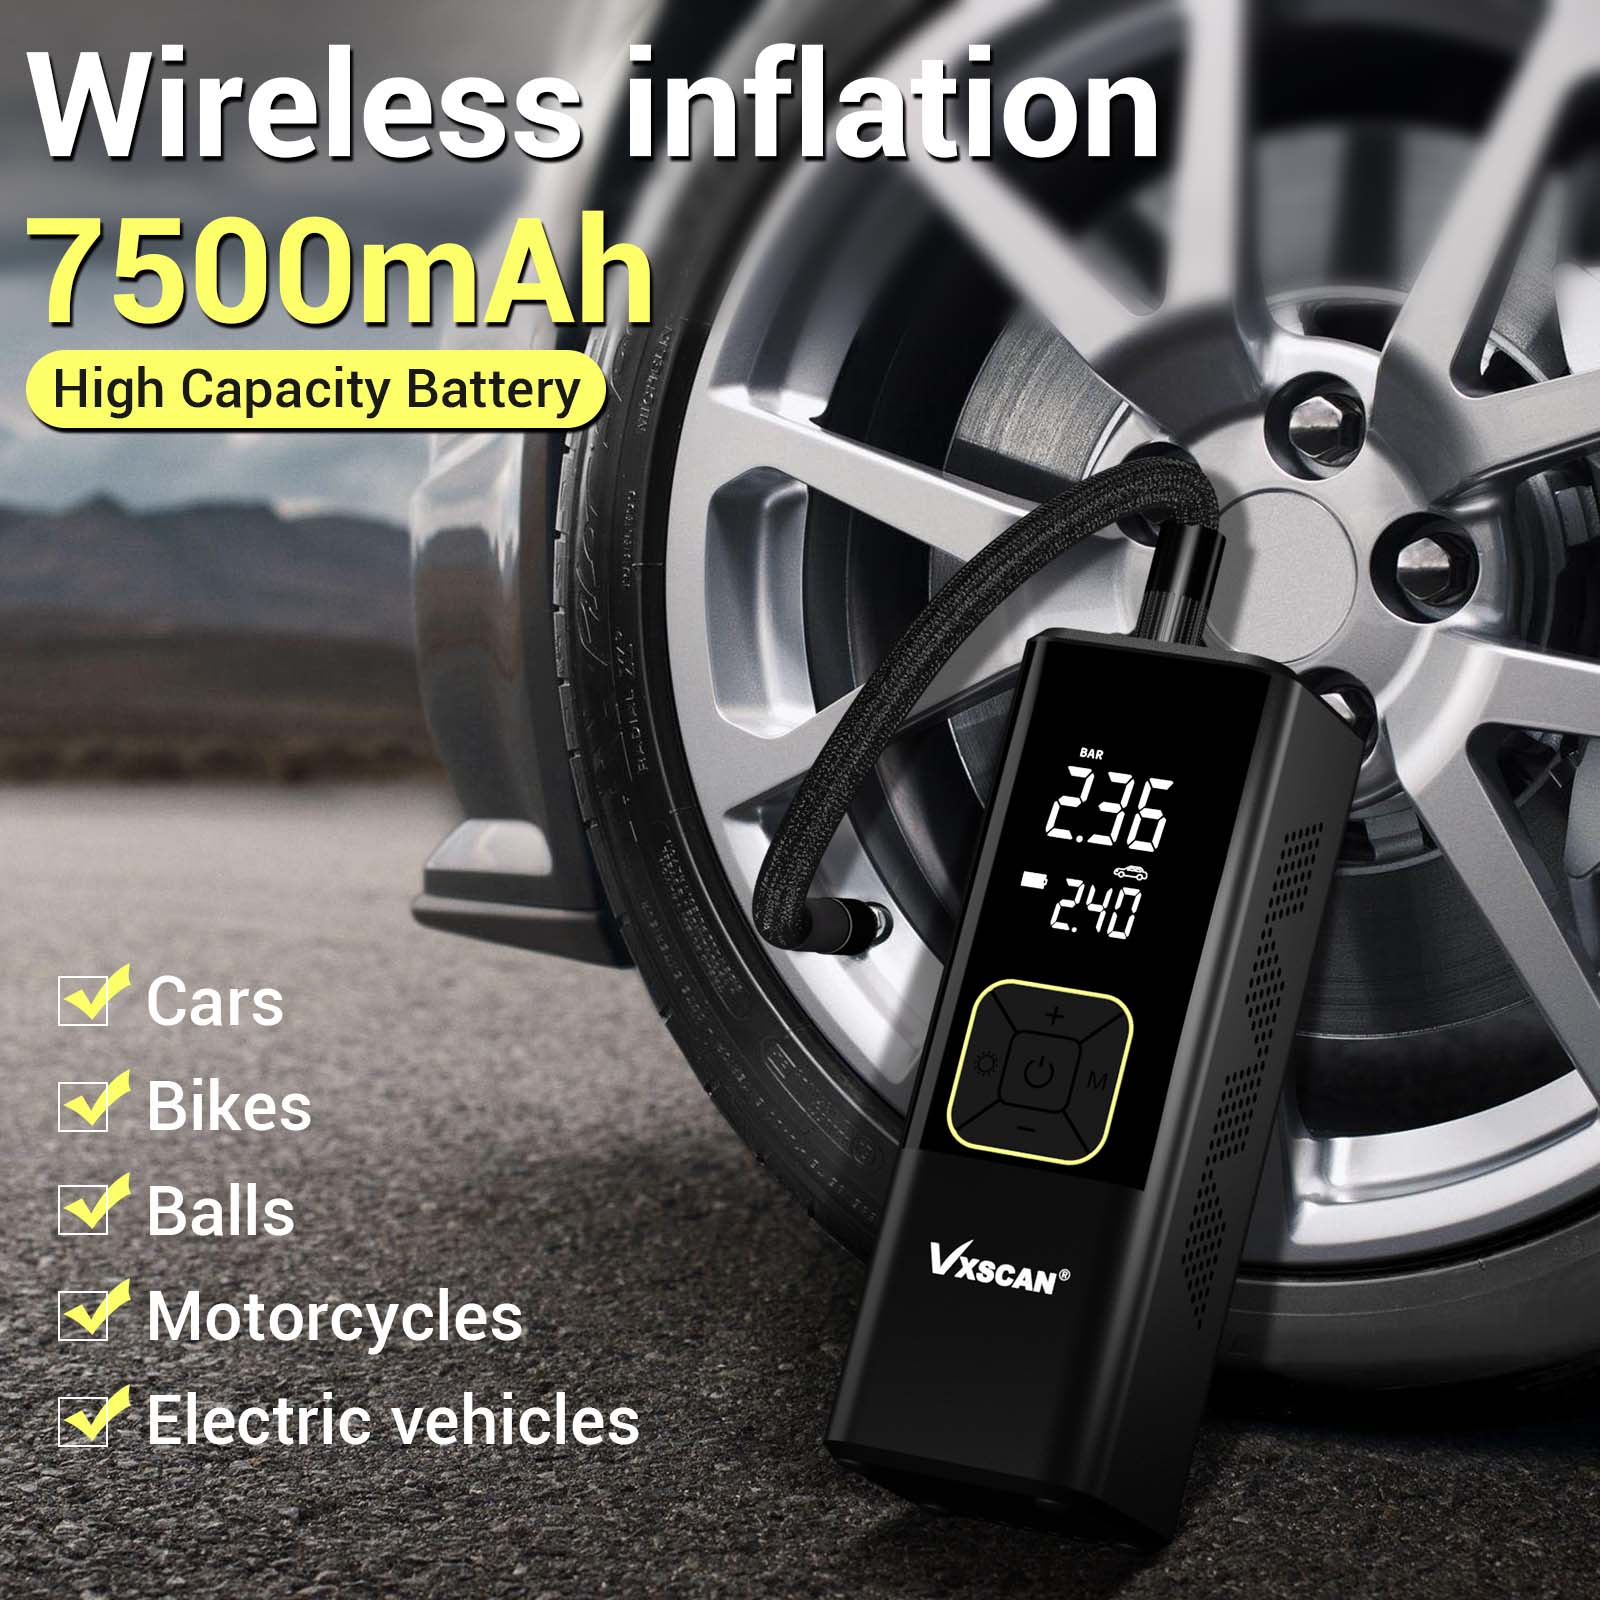 Portable Car Charging Pump Wireless Inflation Pump Automobile Inflator for  Car Motorcycles for Auto Motorcycles Bicycles